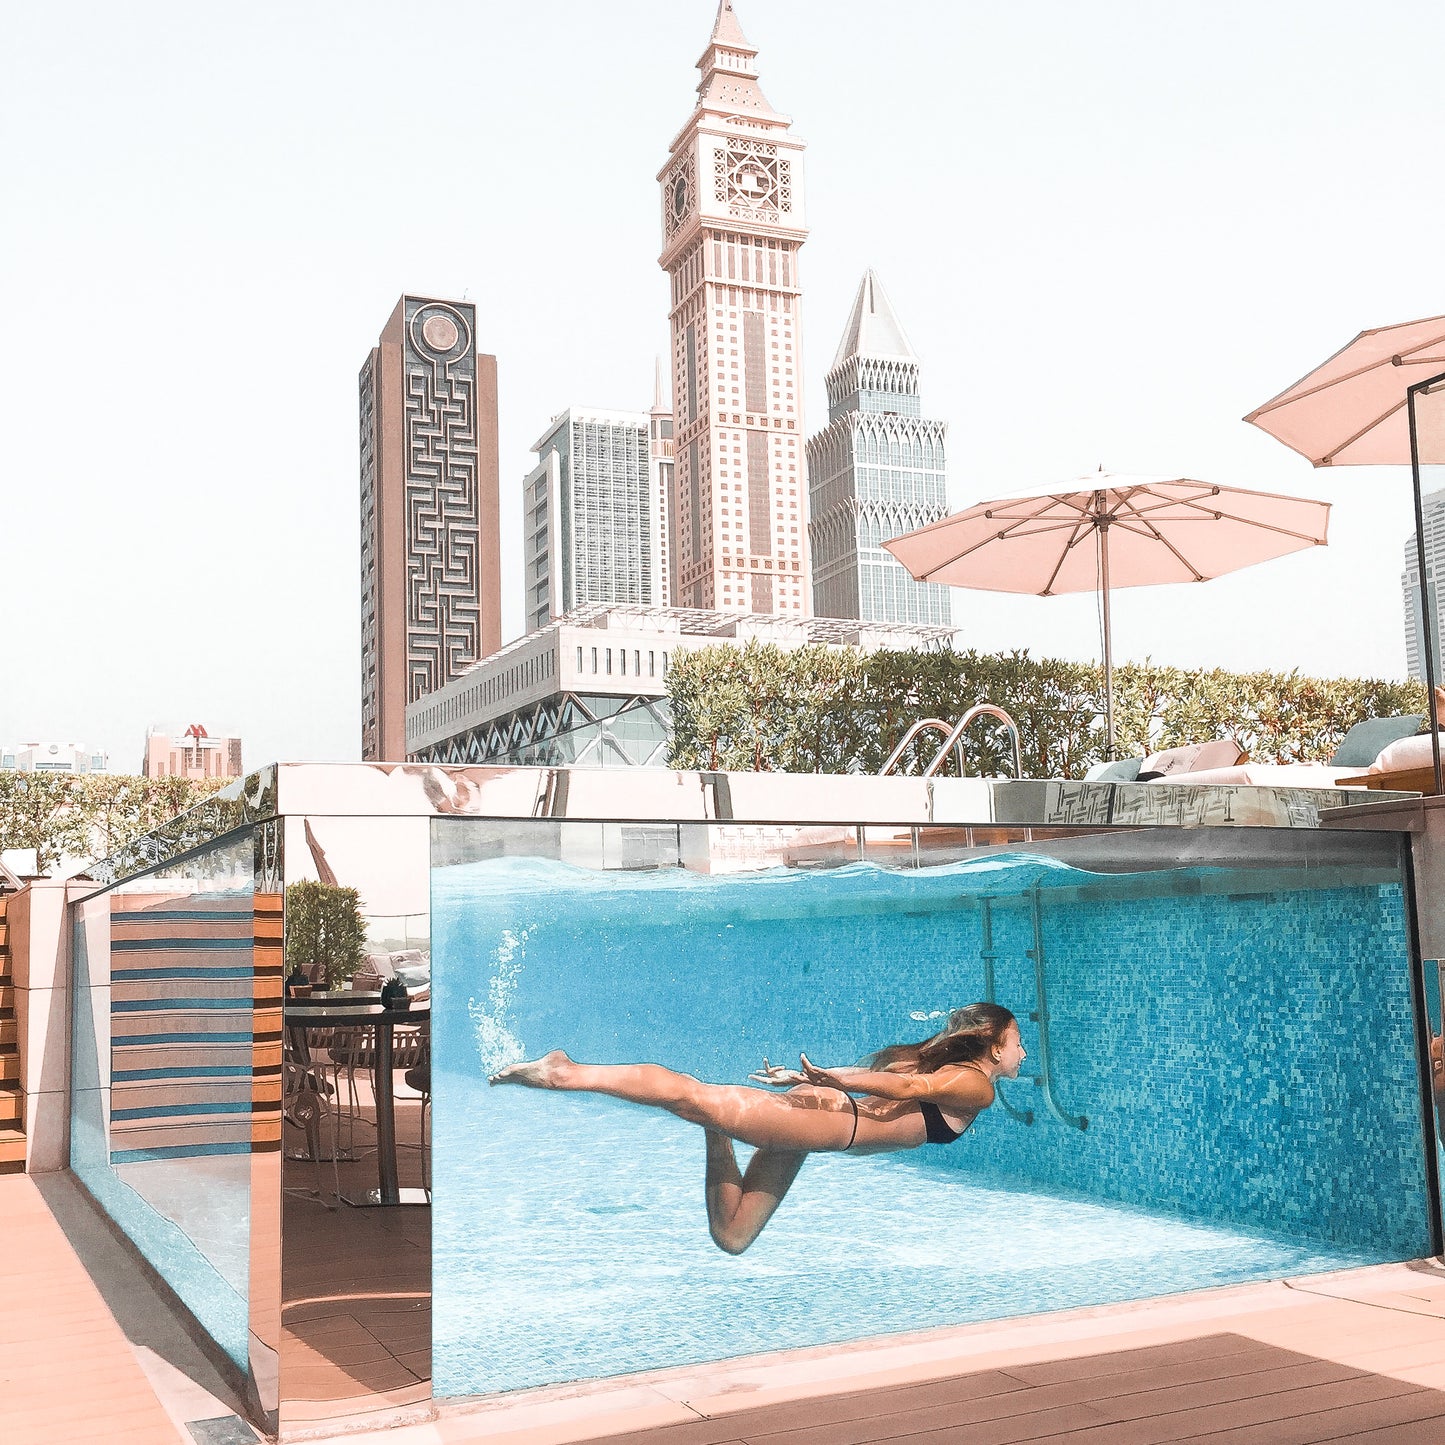 Top 5 Instagrammable Places in Dubai